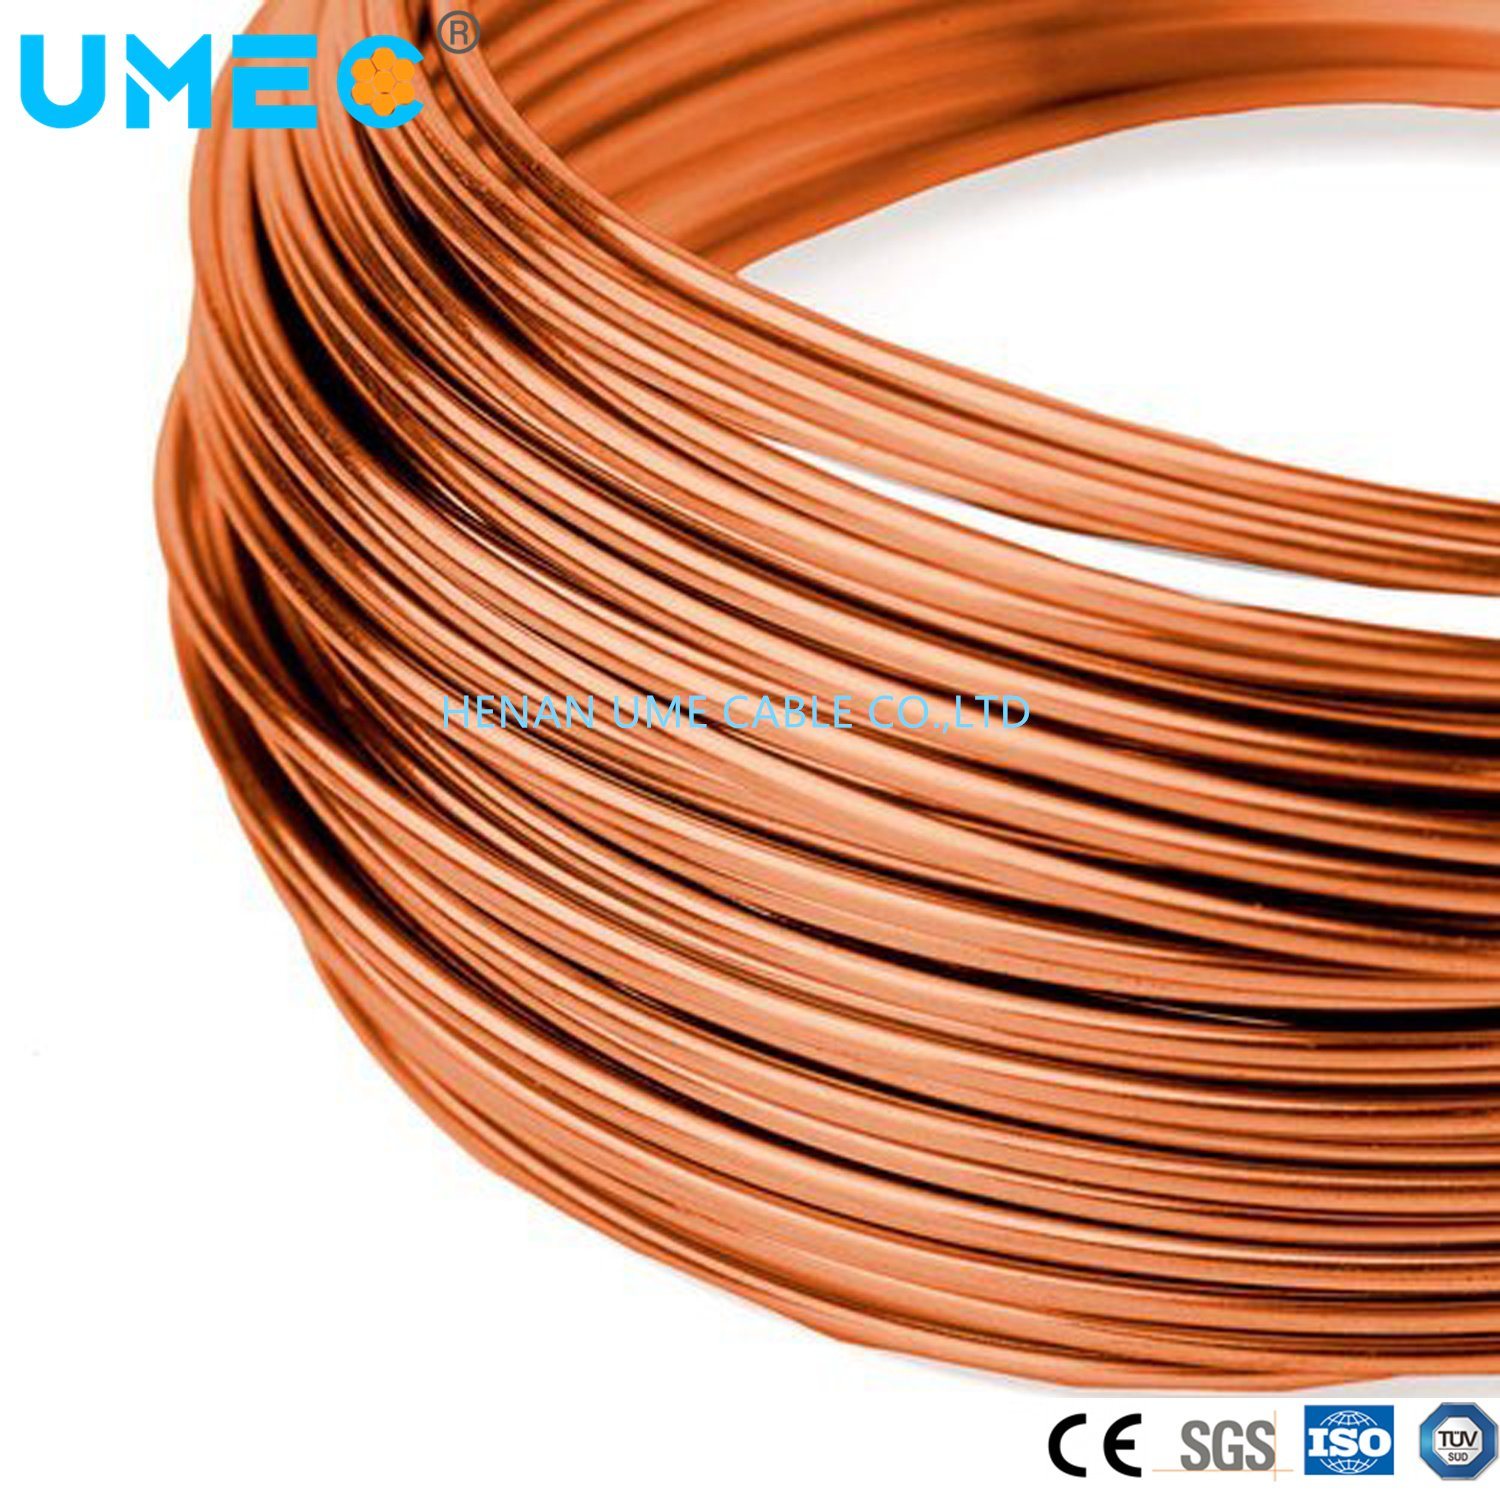 Enameled Aluminum/Copper Wire 0.12mm-2.0mm Factory-Manufactured Enameled Cable Copper Clad Aluminum Wire